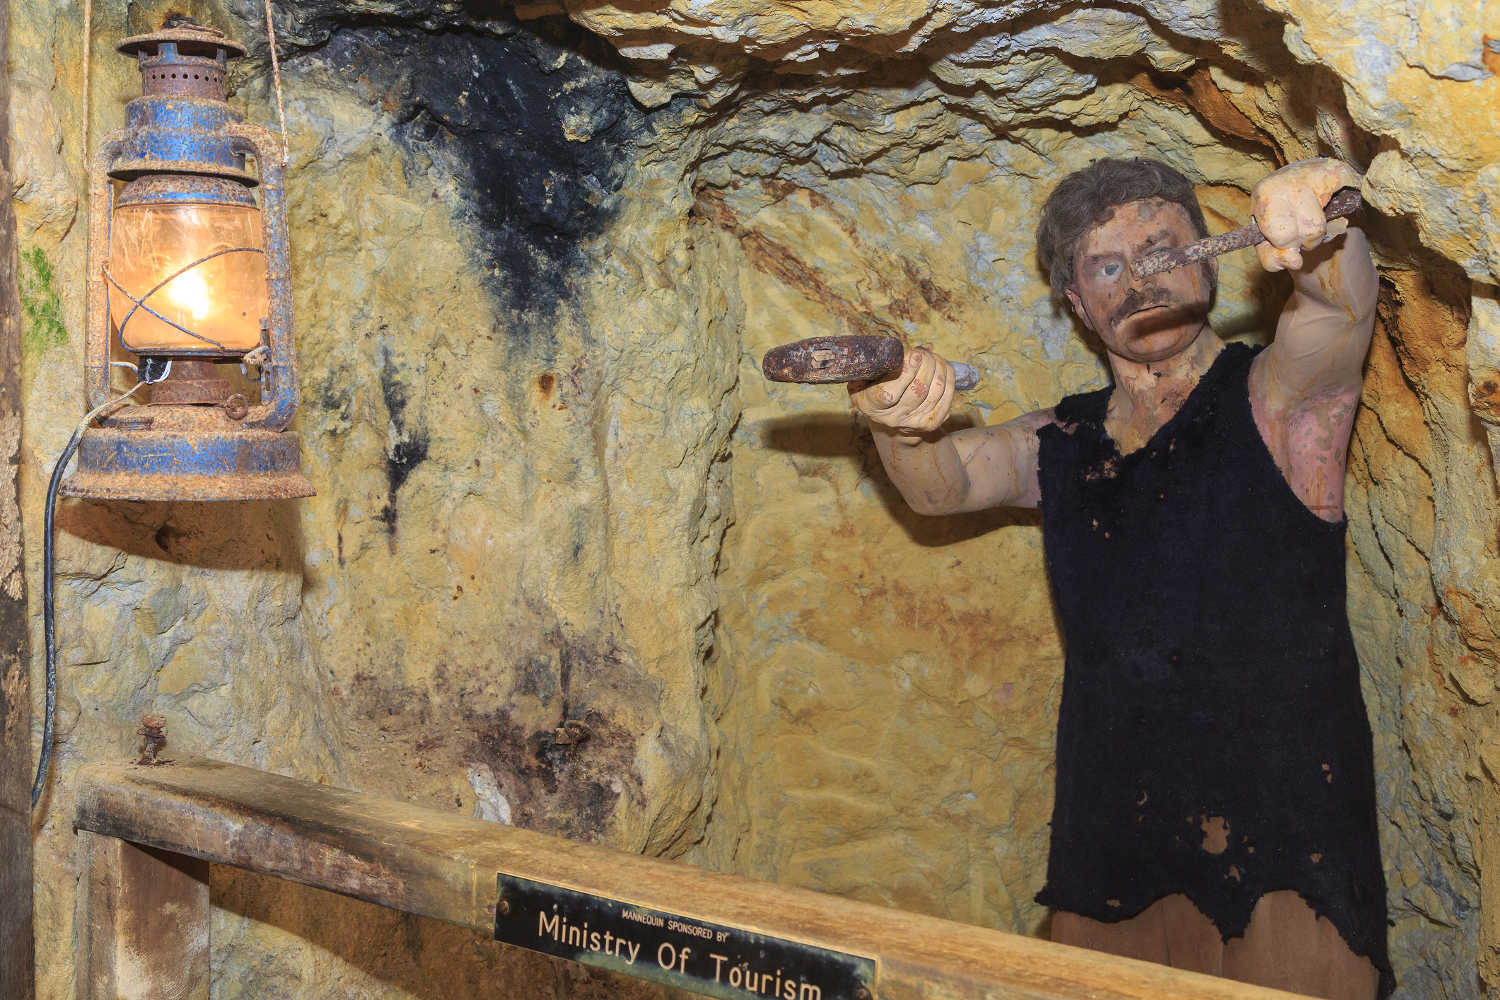 Thames Goldmine Experience, a tourist attraction in the old gold mining town of Thames, New Zealand